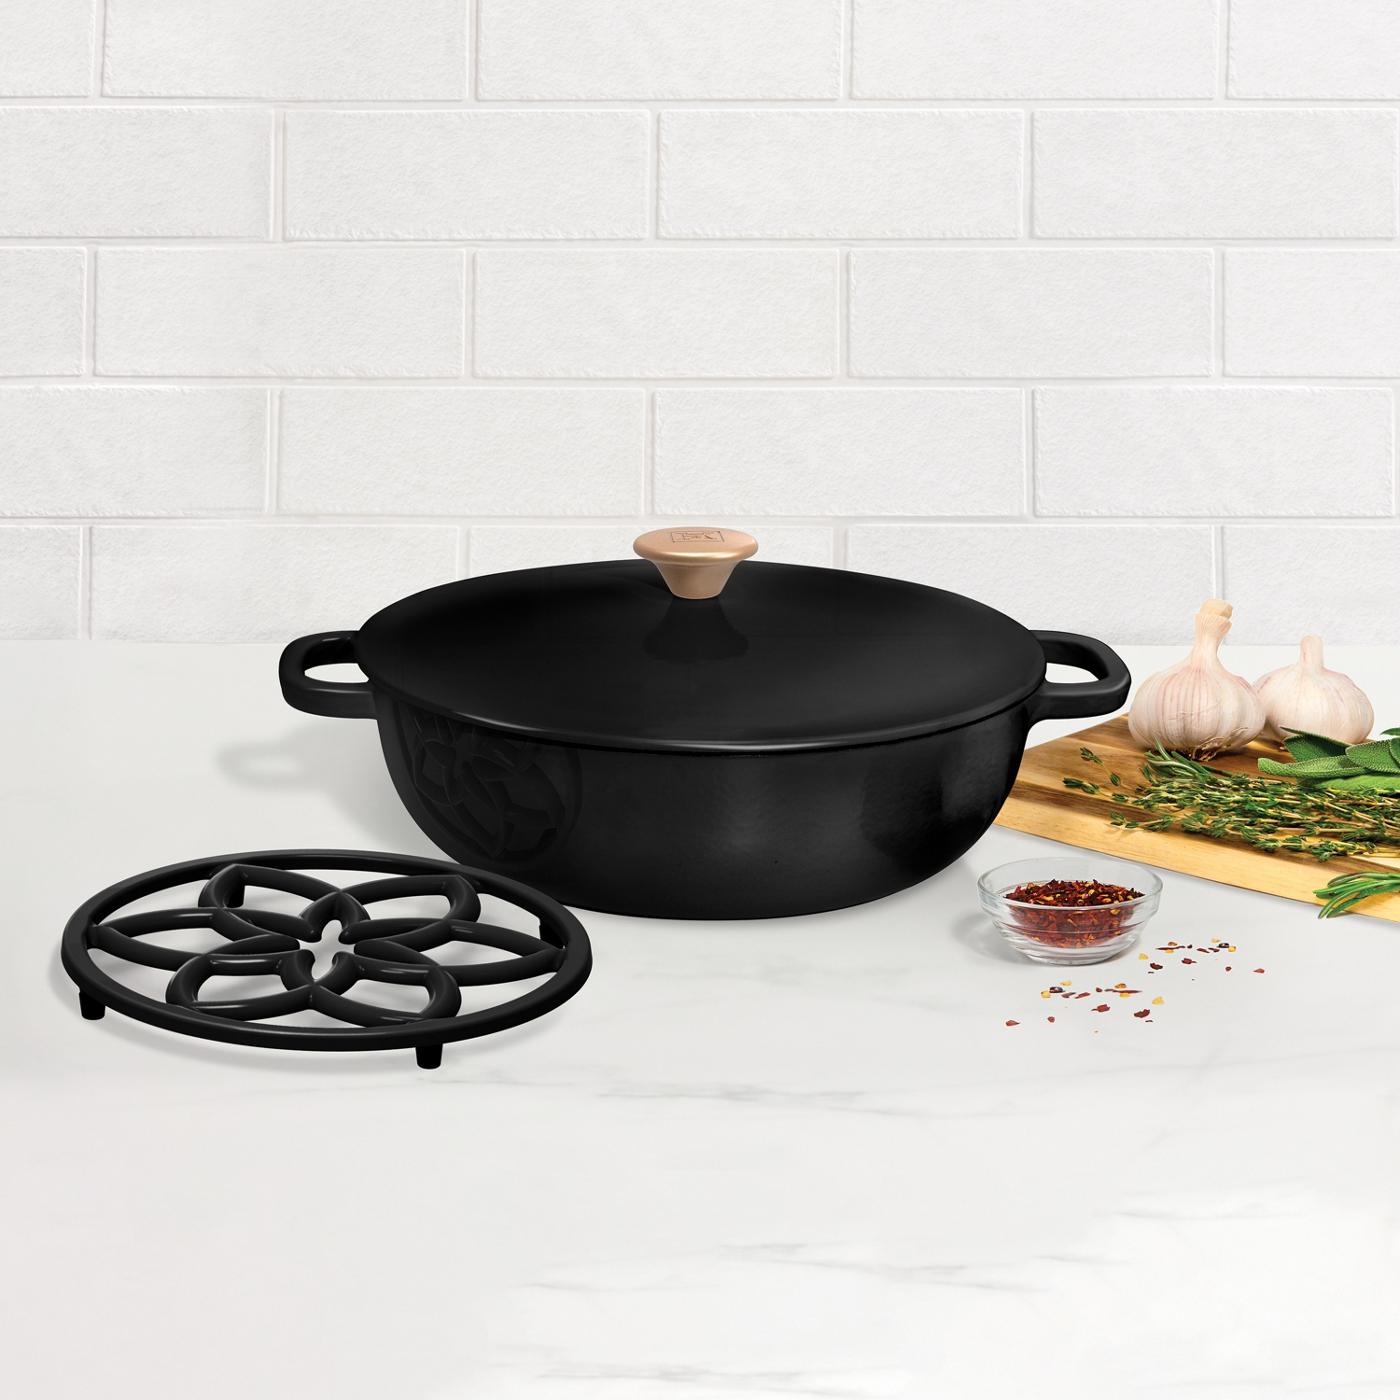 Kitchen & Table by H-E-B Enameled Cast Iron Dutch Oven - Cloud